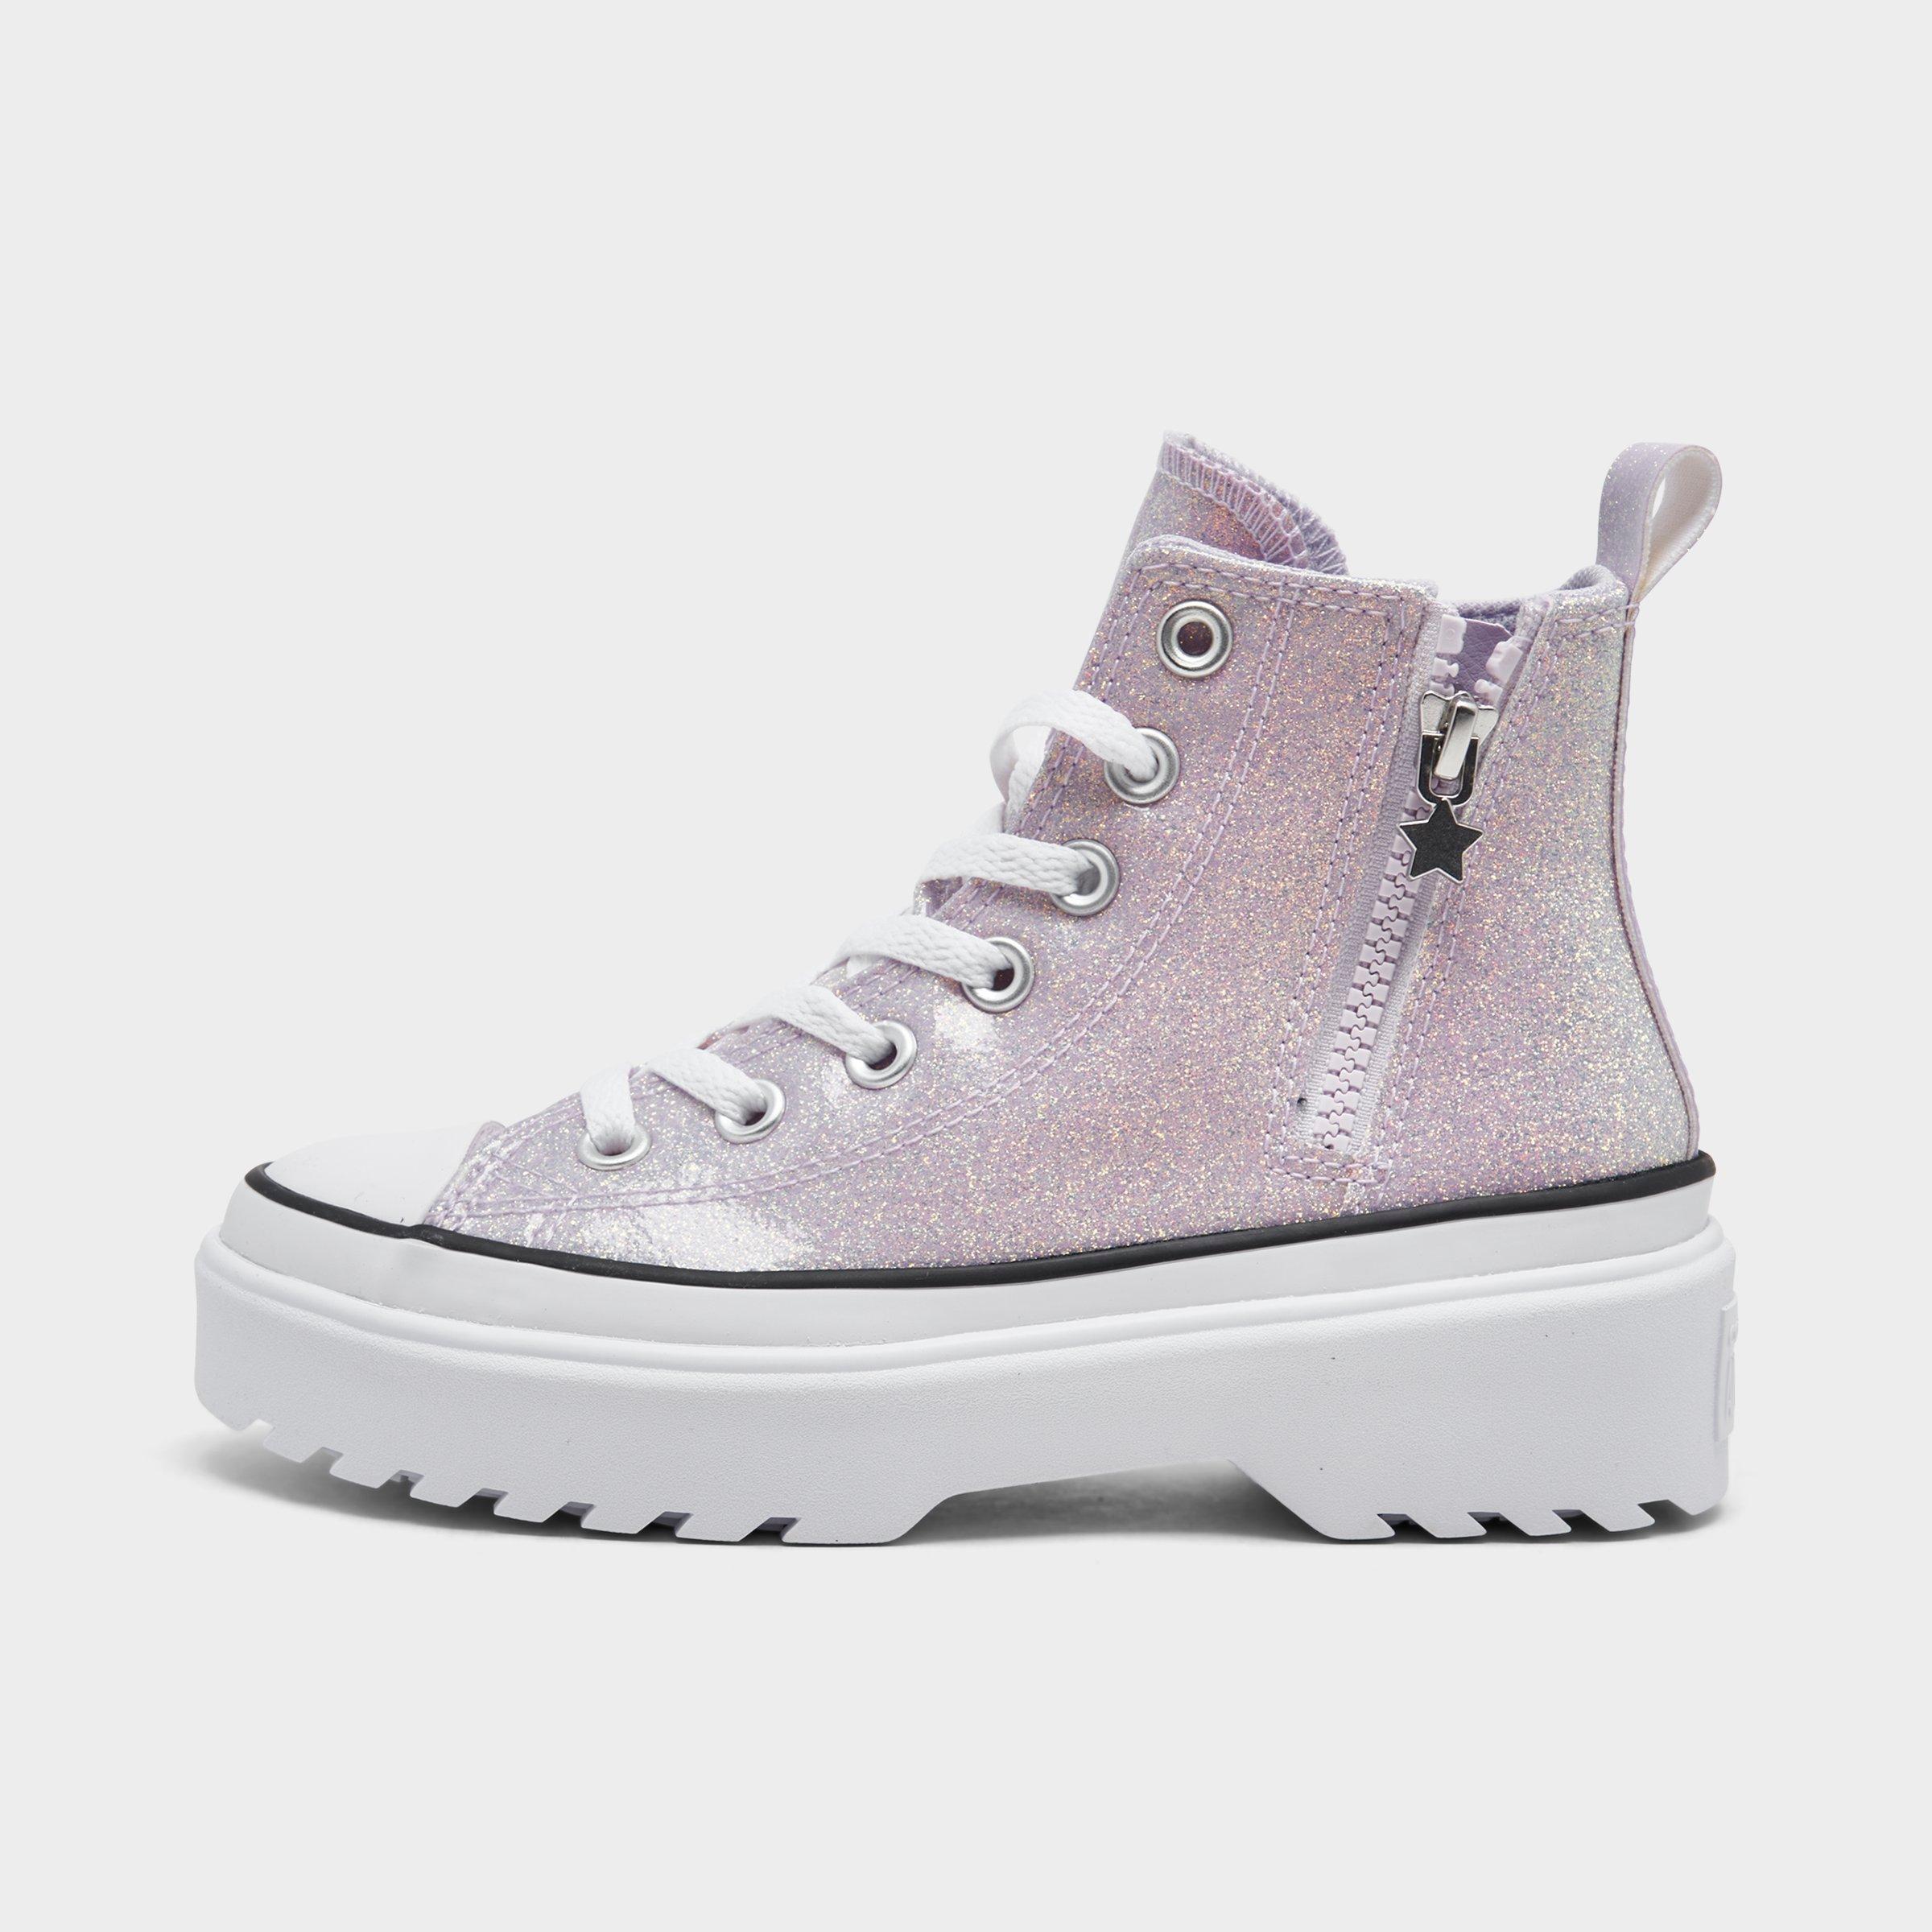 CONVERSE CONVERSE GIRLS' LITTLE KIDS' CHUCK TAYLOR ALL STAR HIGH TOP LUGGED CASUAL SHOES